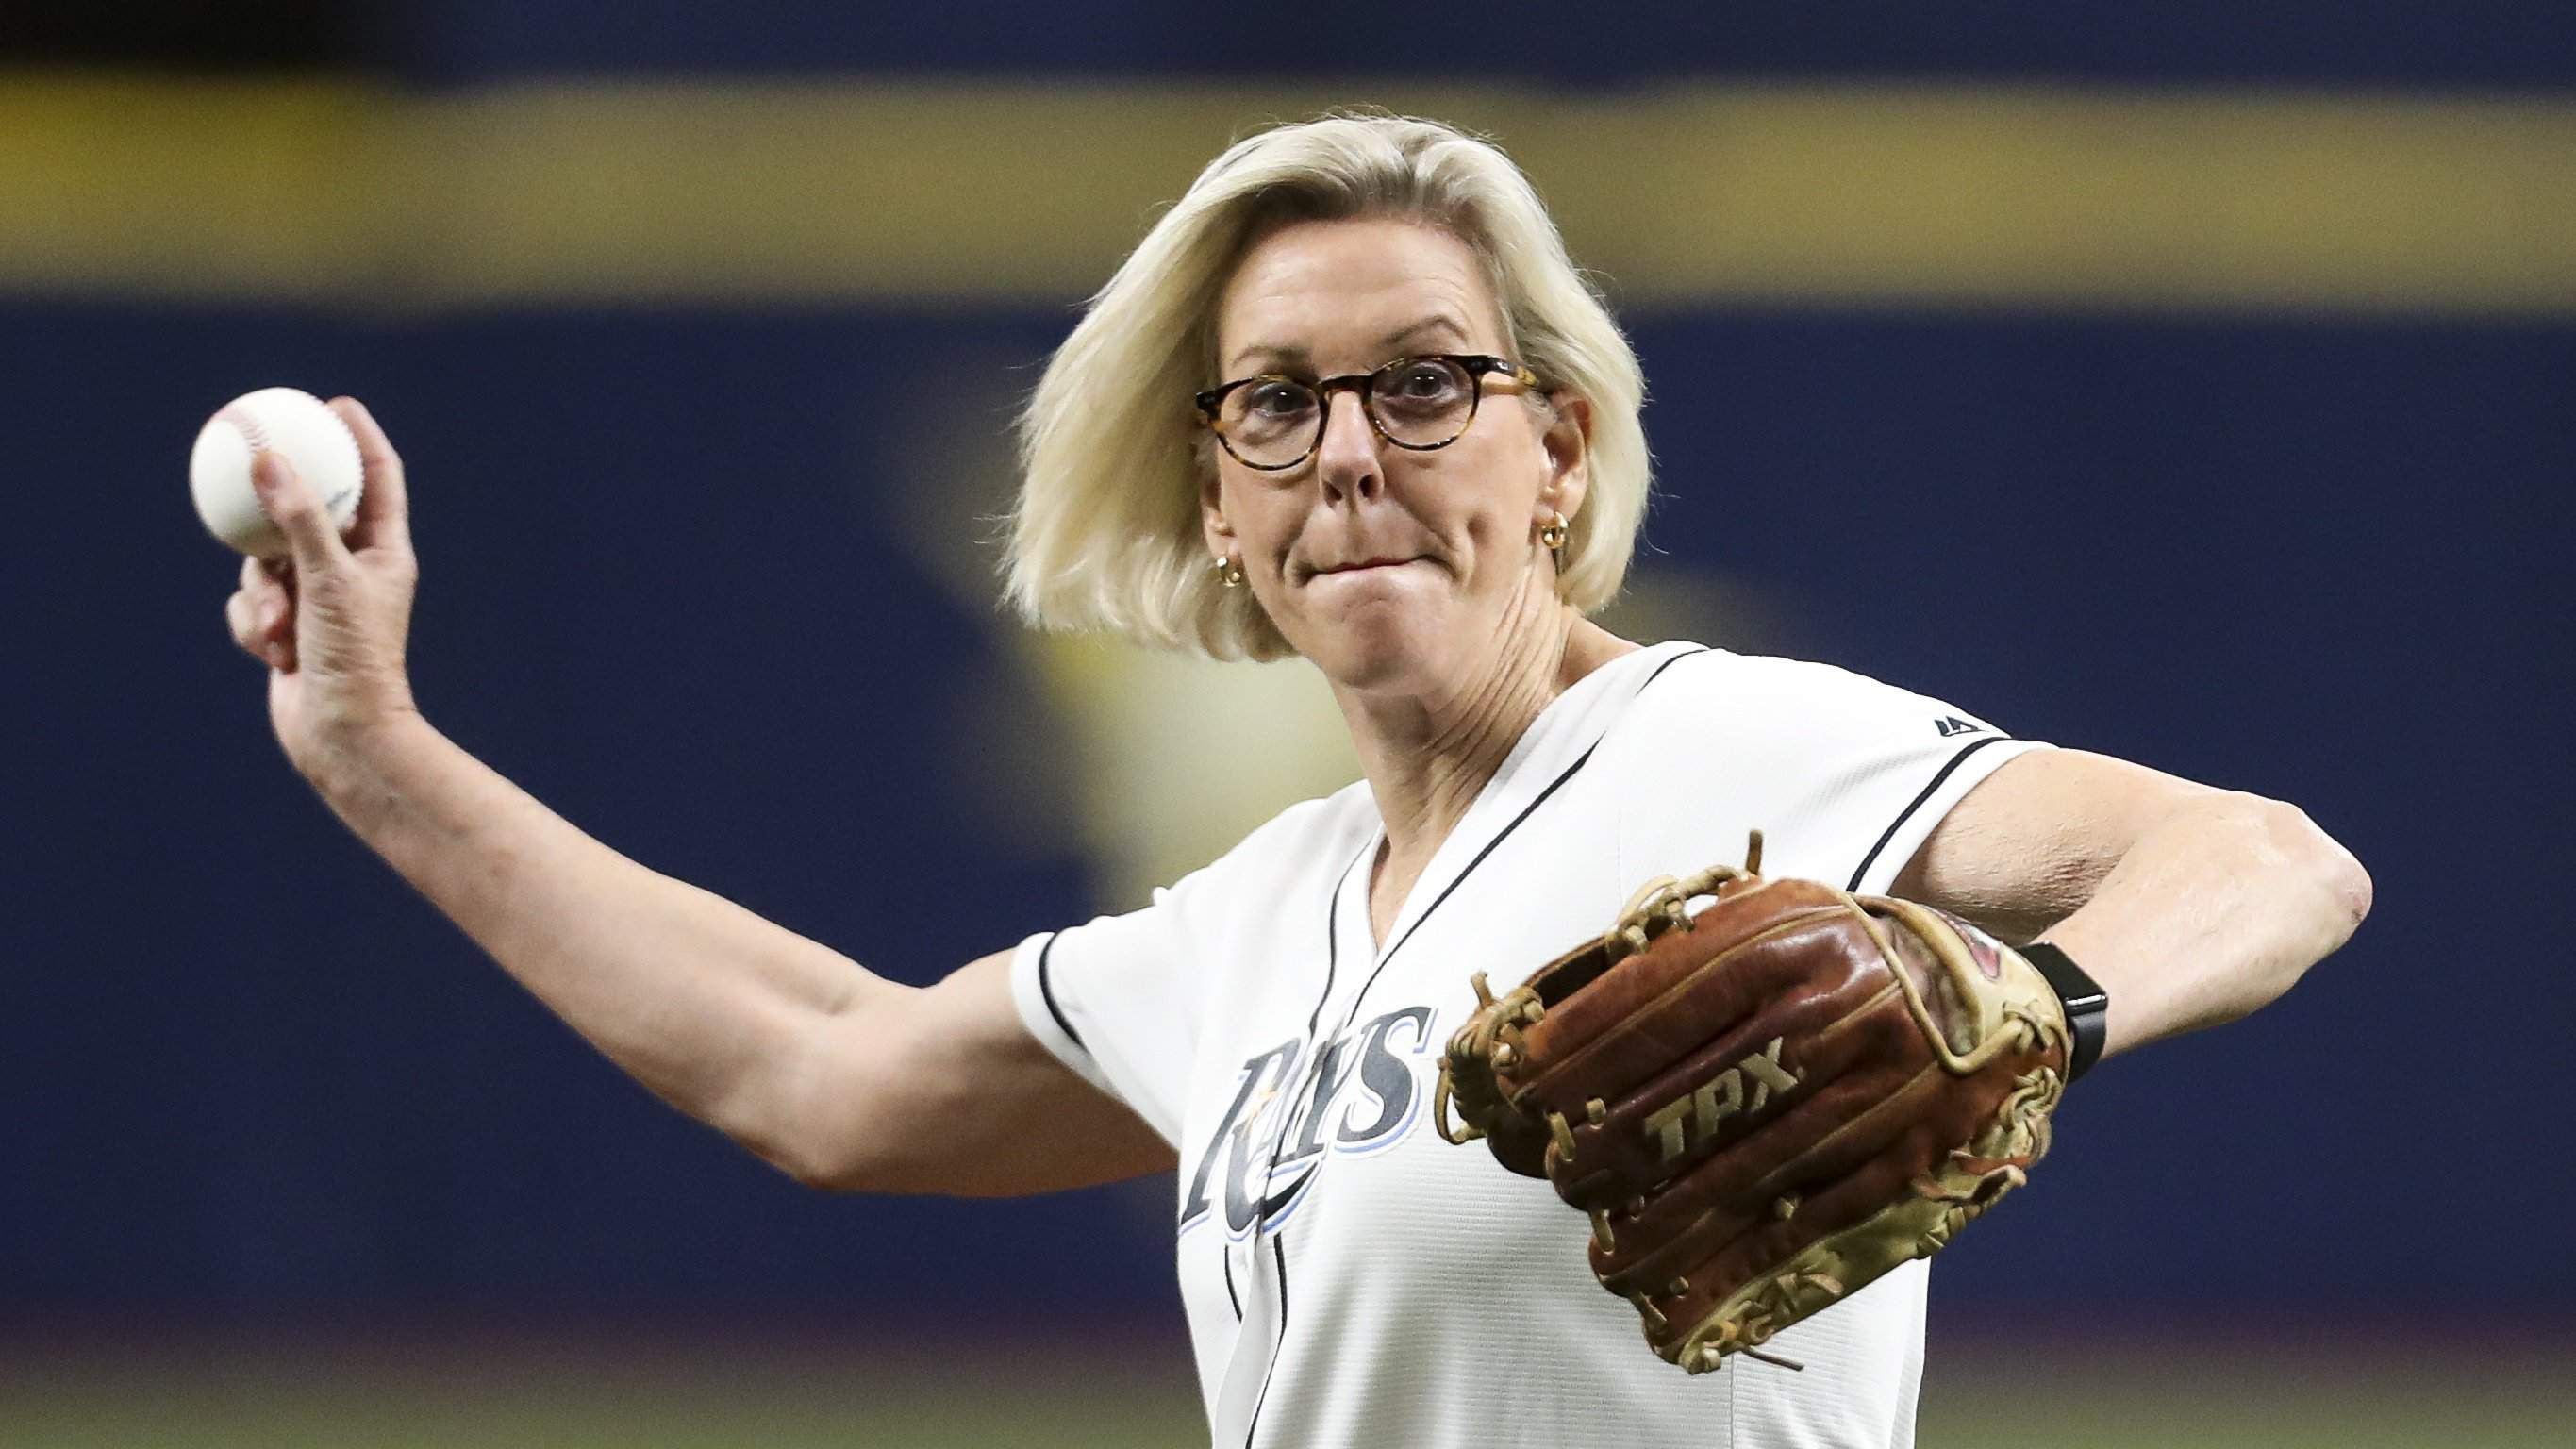 Tampa mayor Jane Castor to throw out first pitch for Rays annual Pride Night  on Friday - DRaysBay